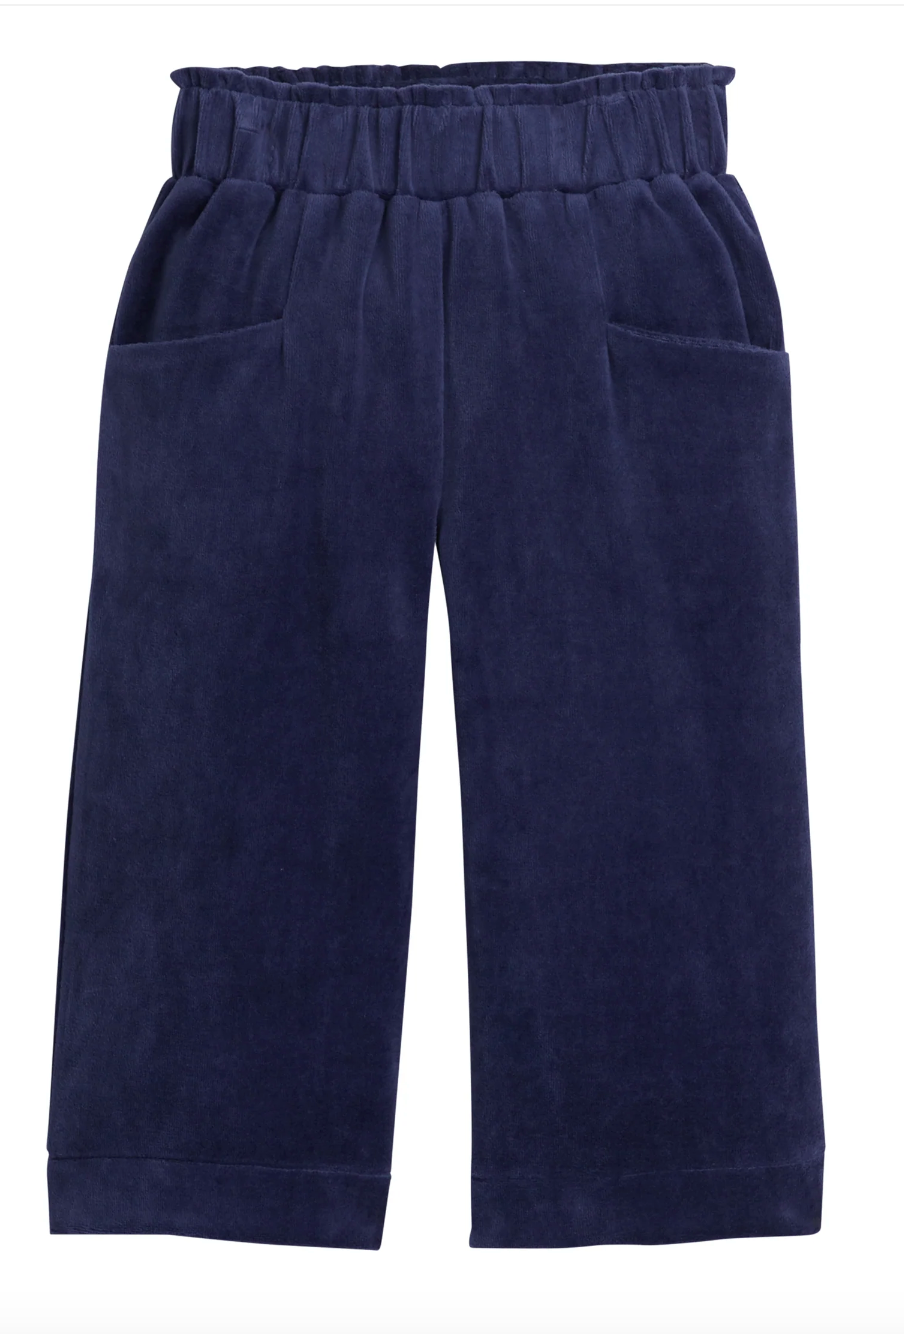 Cropped Palazzo Pants - Navy Velour